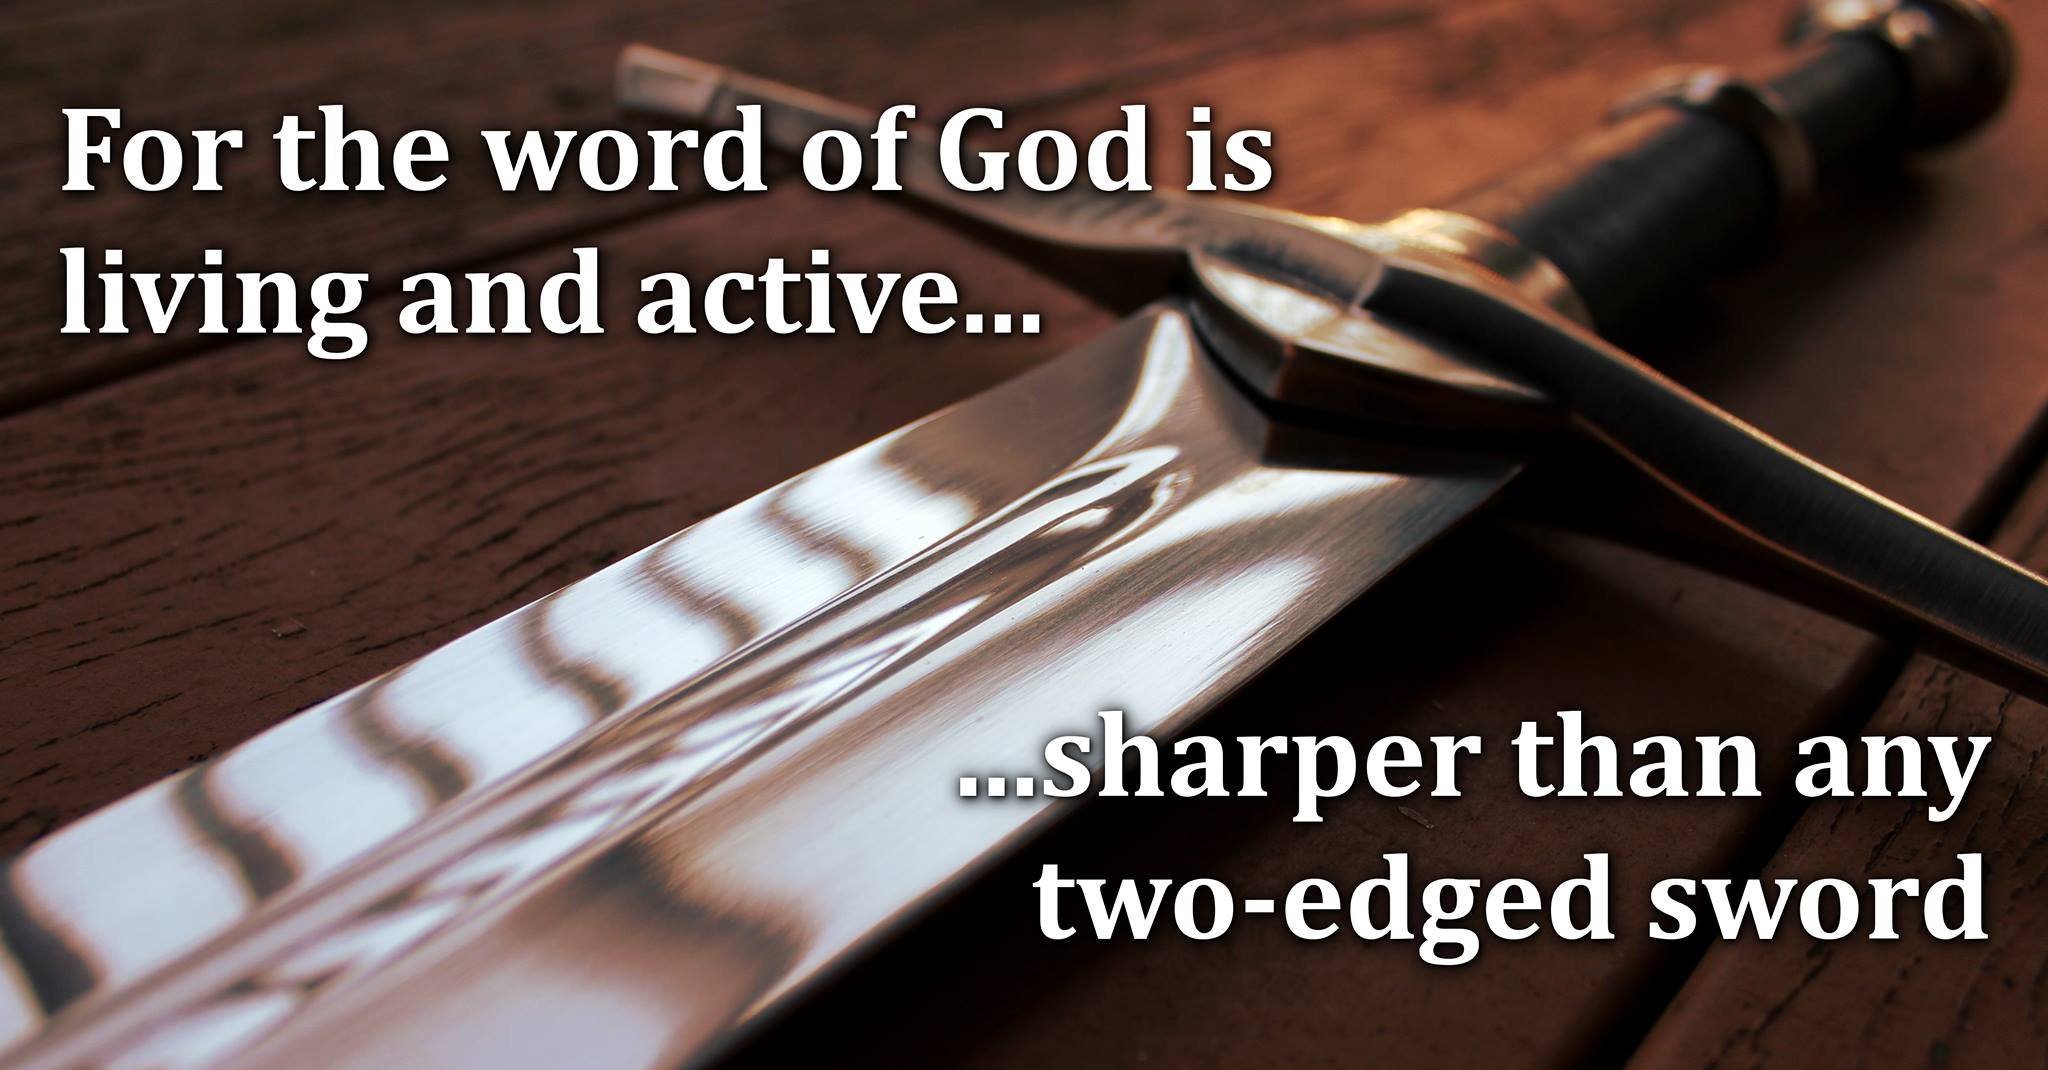 Image result for word of god 2 edged sword